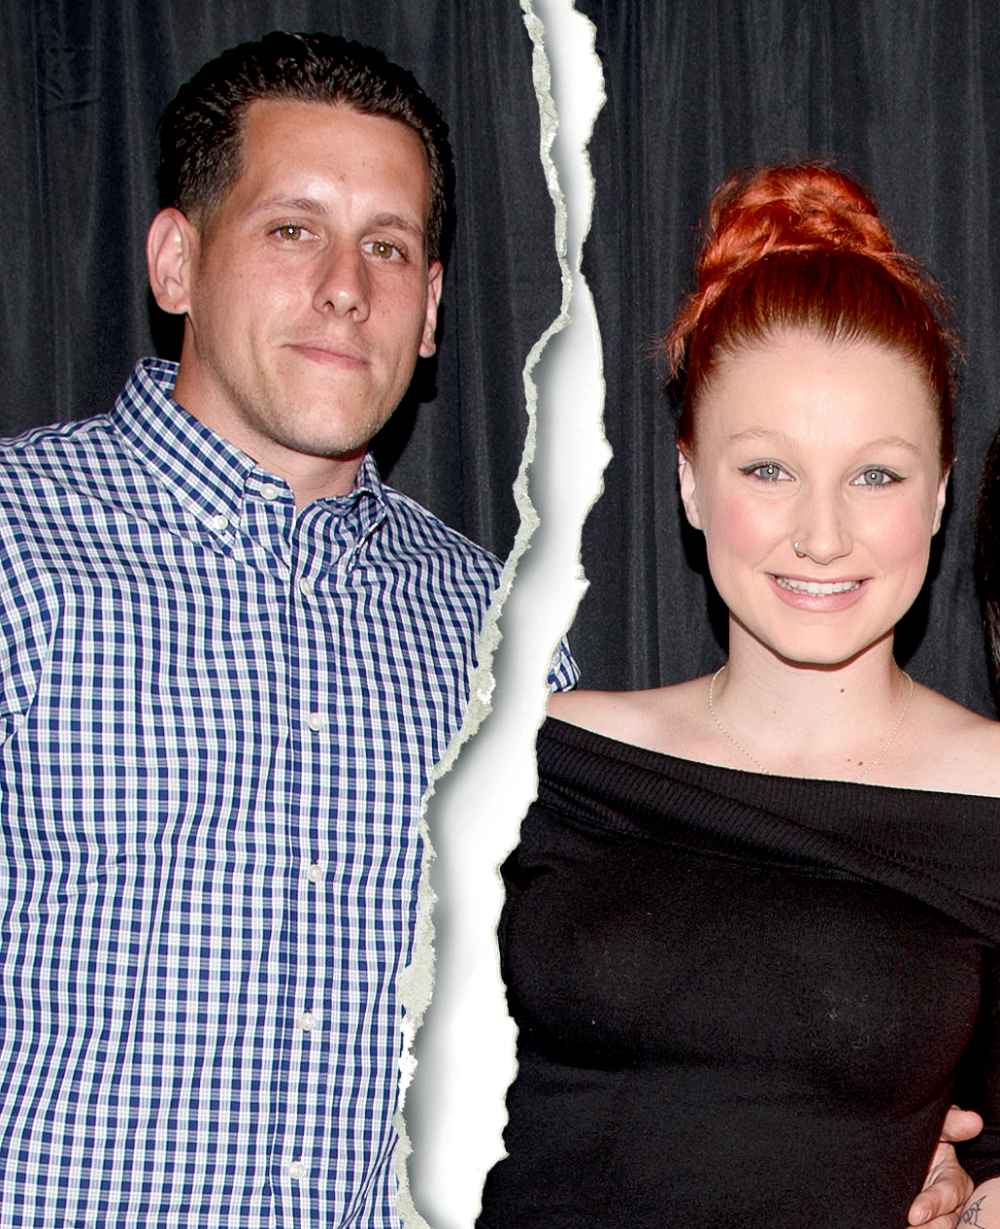 Chelsea-O’Donnell-Files-for-Divorce-From-Nick-Alliegro